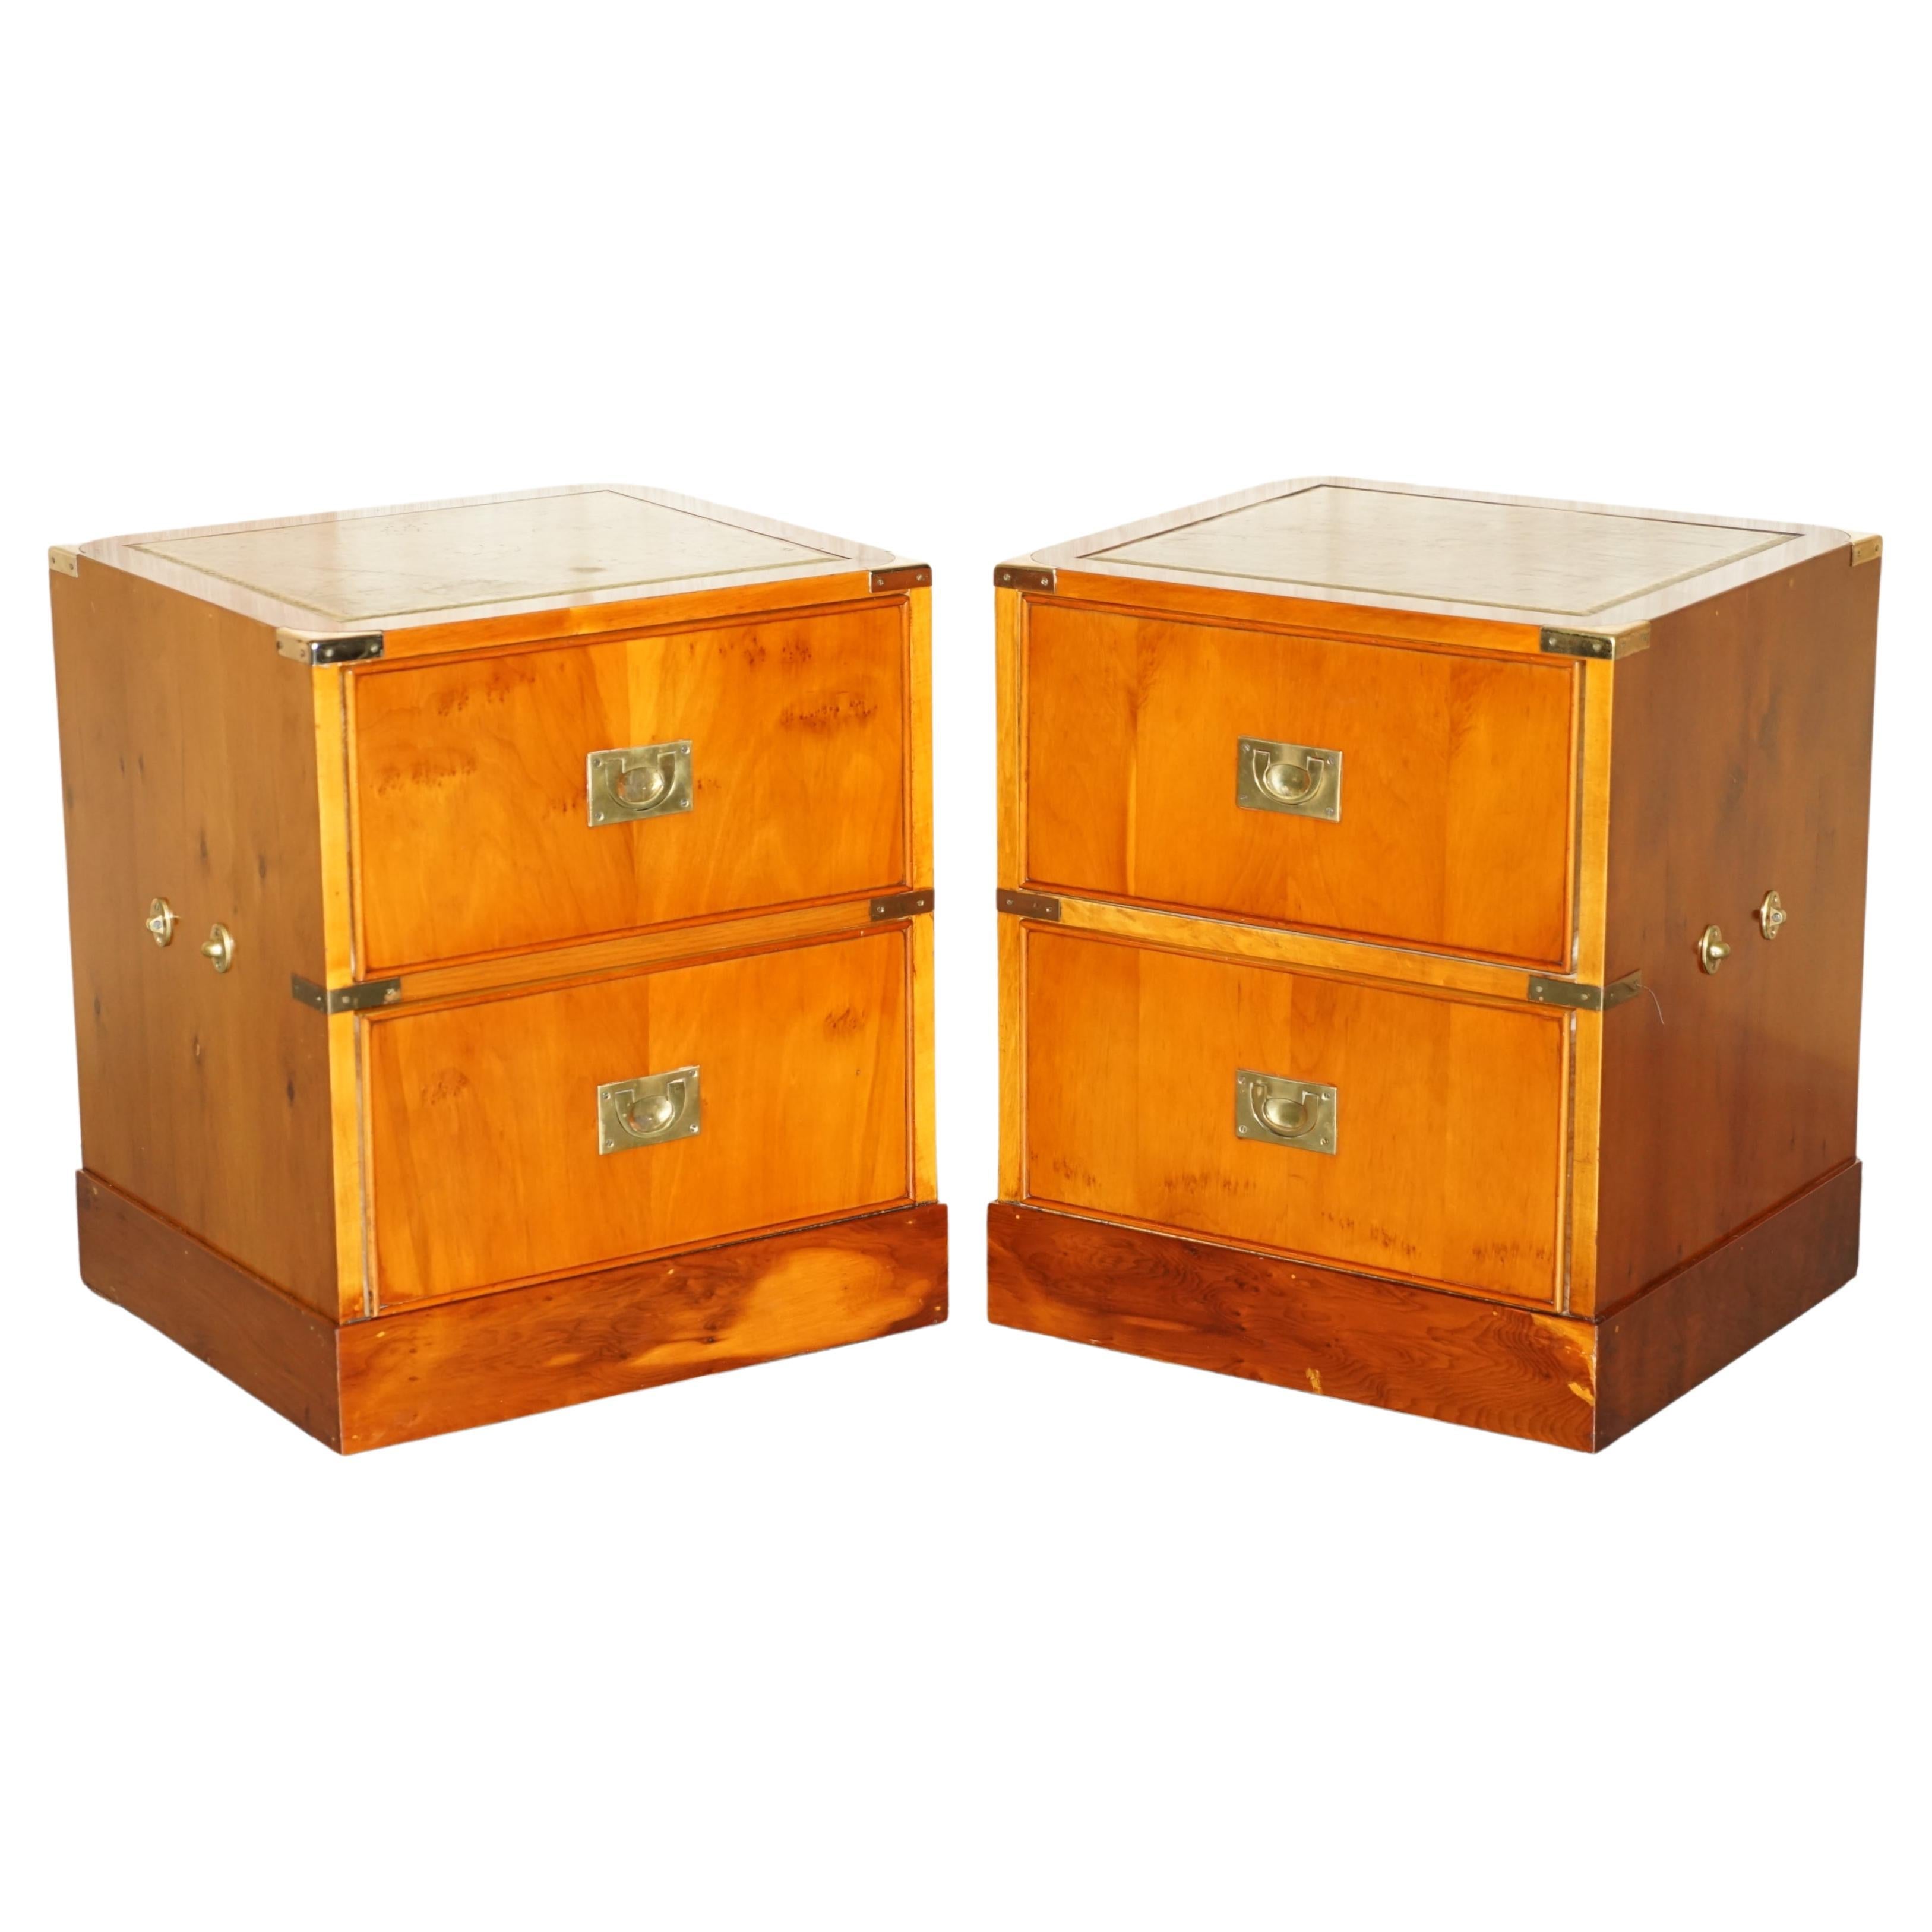 LOVELY PAiR OF BURR YEW WOOD GREEN LEATHER MILITARY CAMPAIGN NIGHTSTAND DRAWERS im Angebot